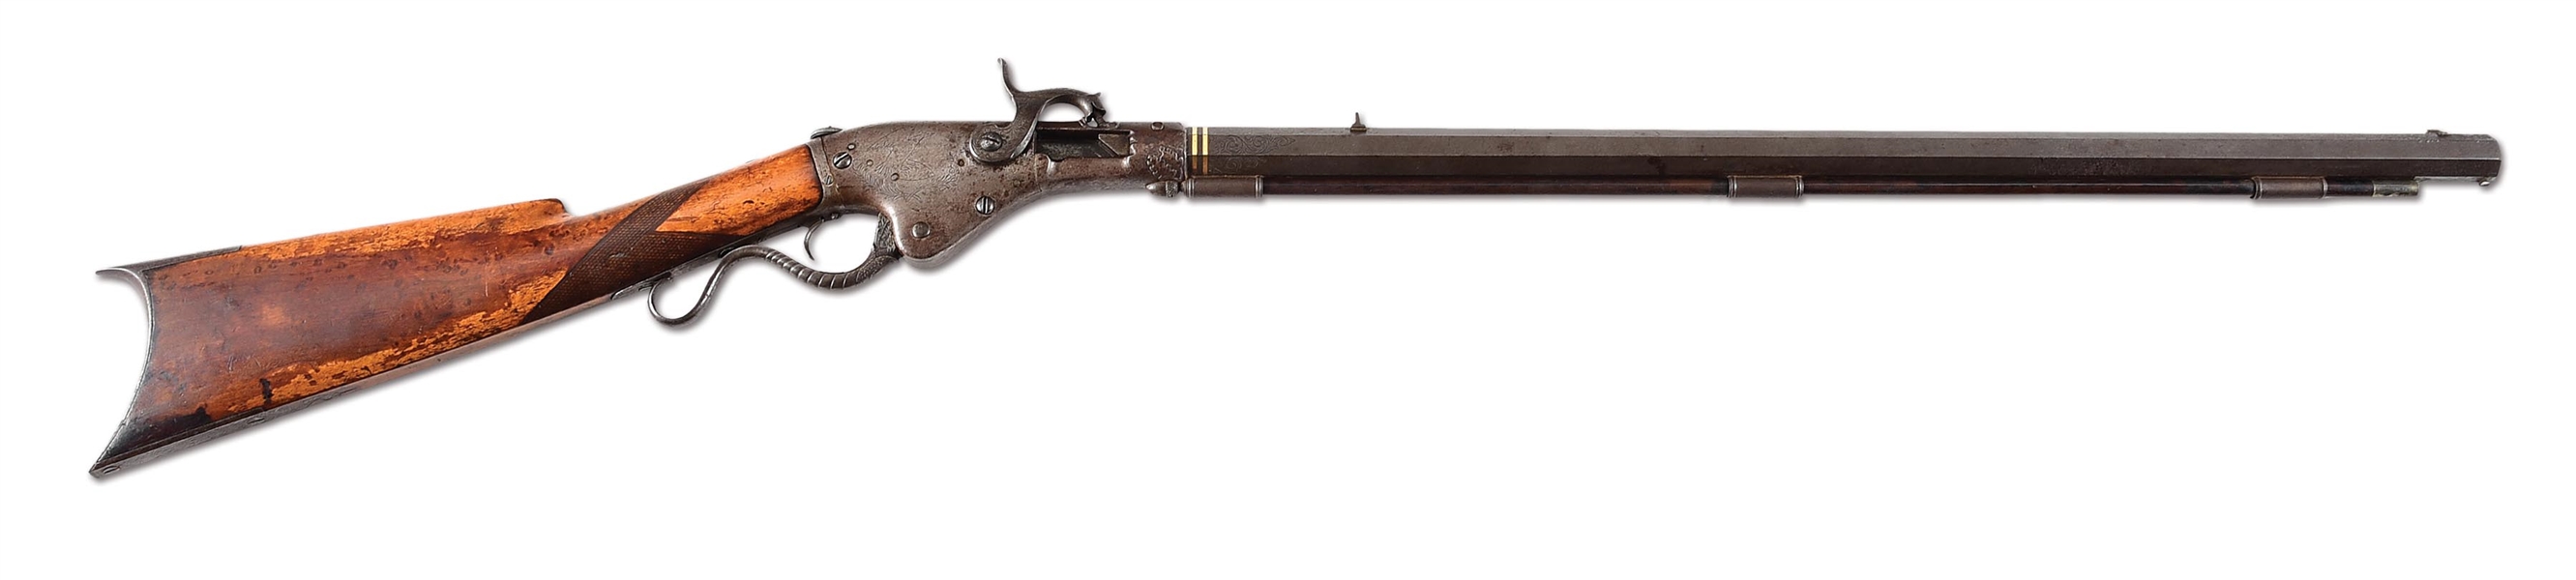 (A) RARE, ENGRAVED, AND GOLD INLAID EXHIBITION QUALITY MARSTON BREECH-LOADING PERCUSSION RIFLE.